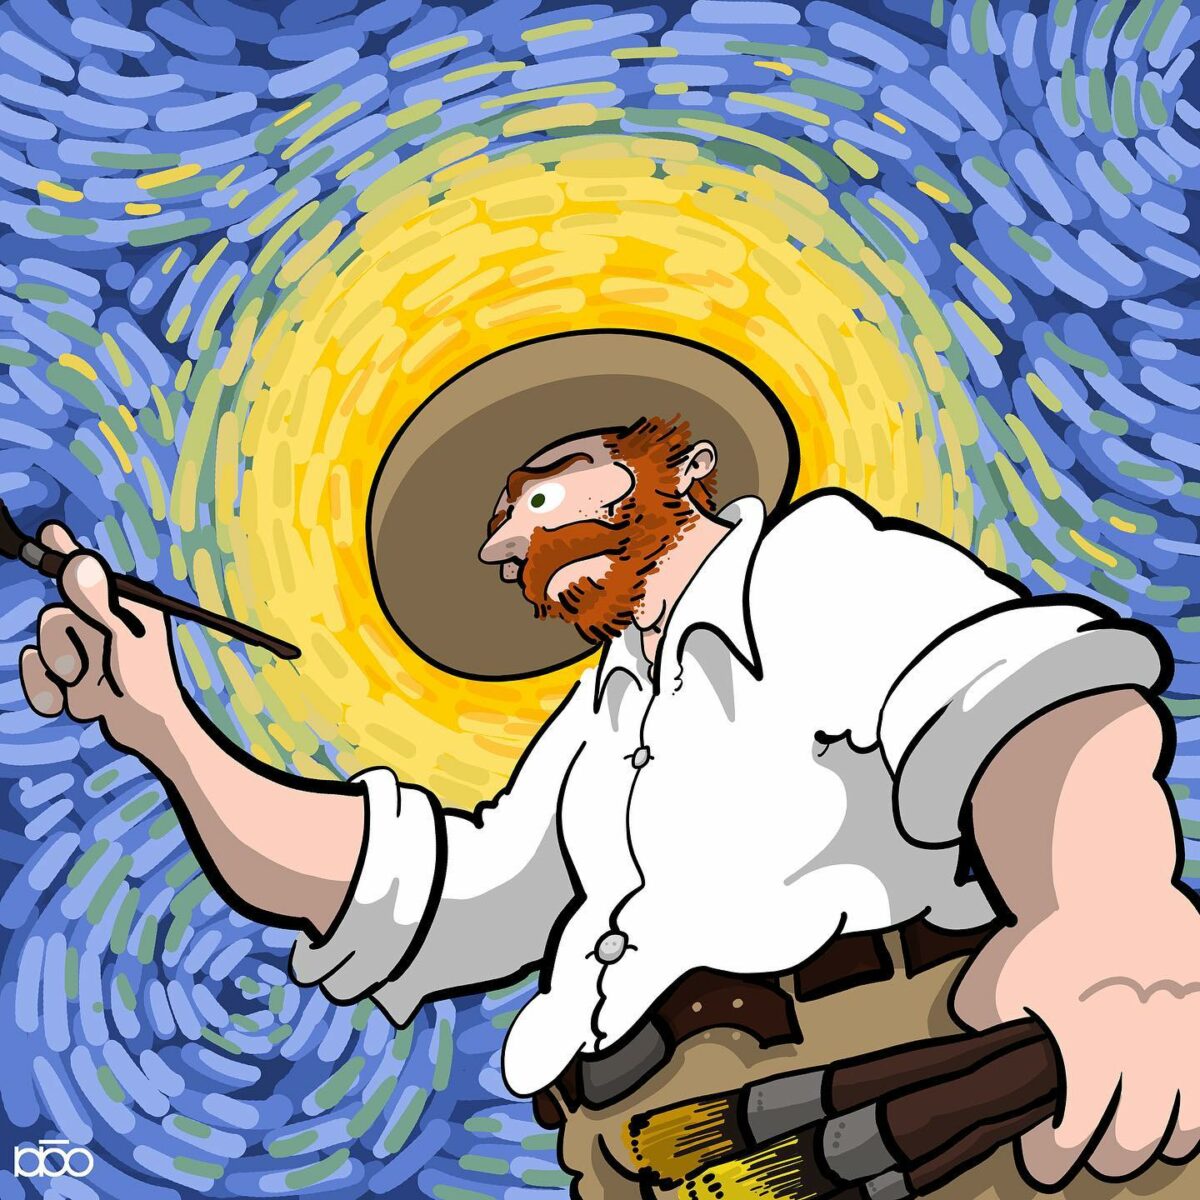 Vincent Van Goghs Life Recreated In His Own Art Style By Alireza Karimi Moghaddam 25